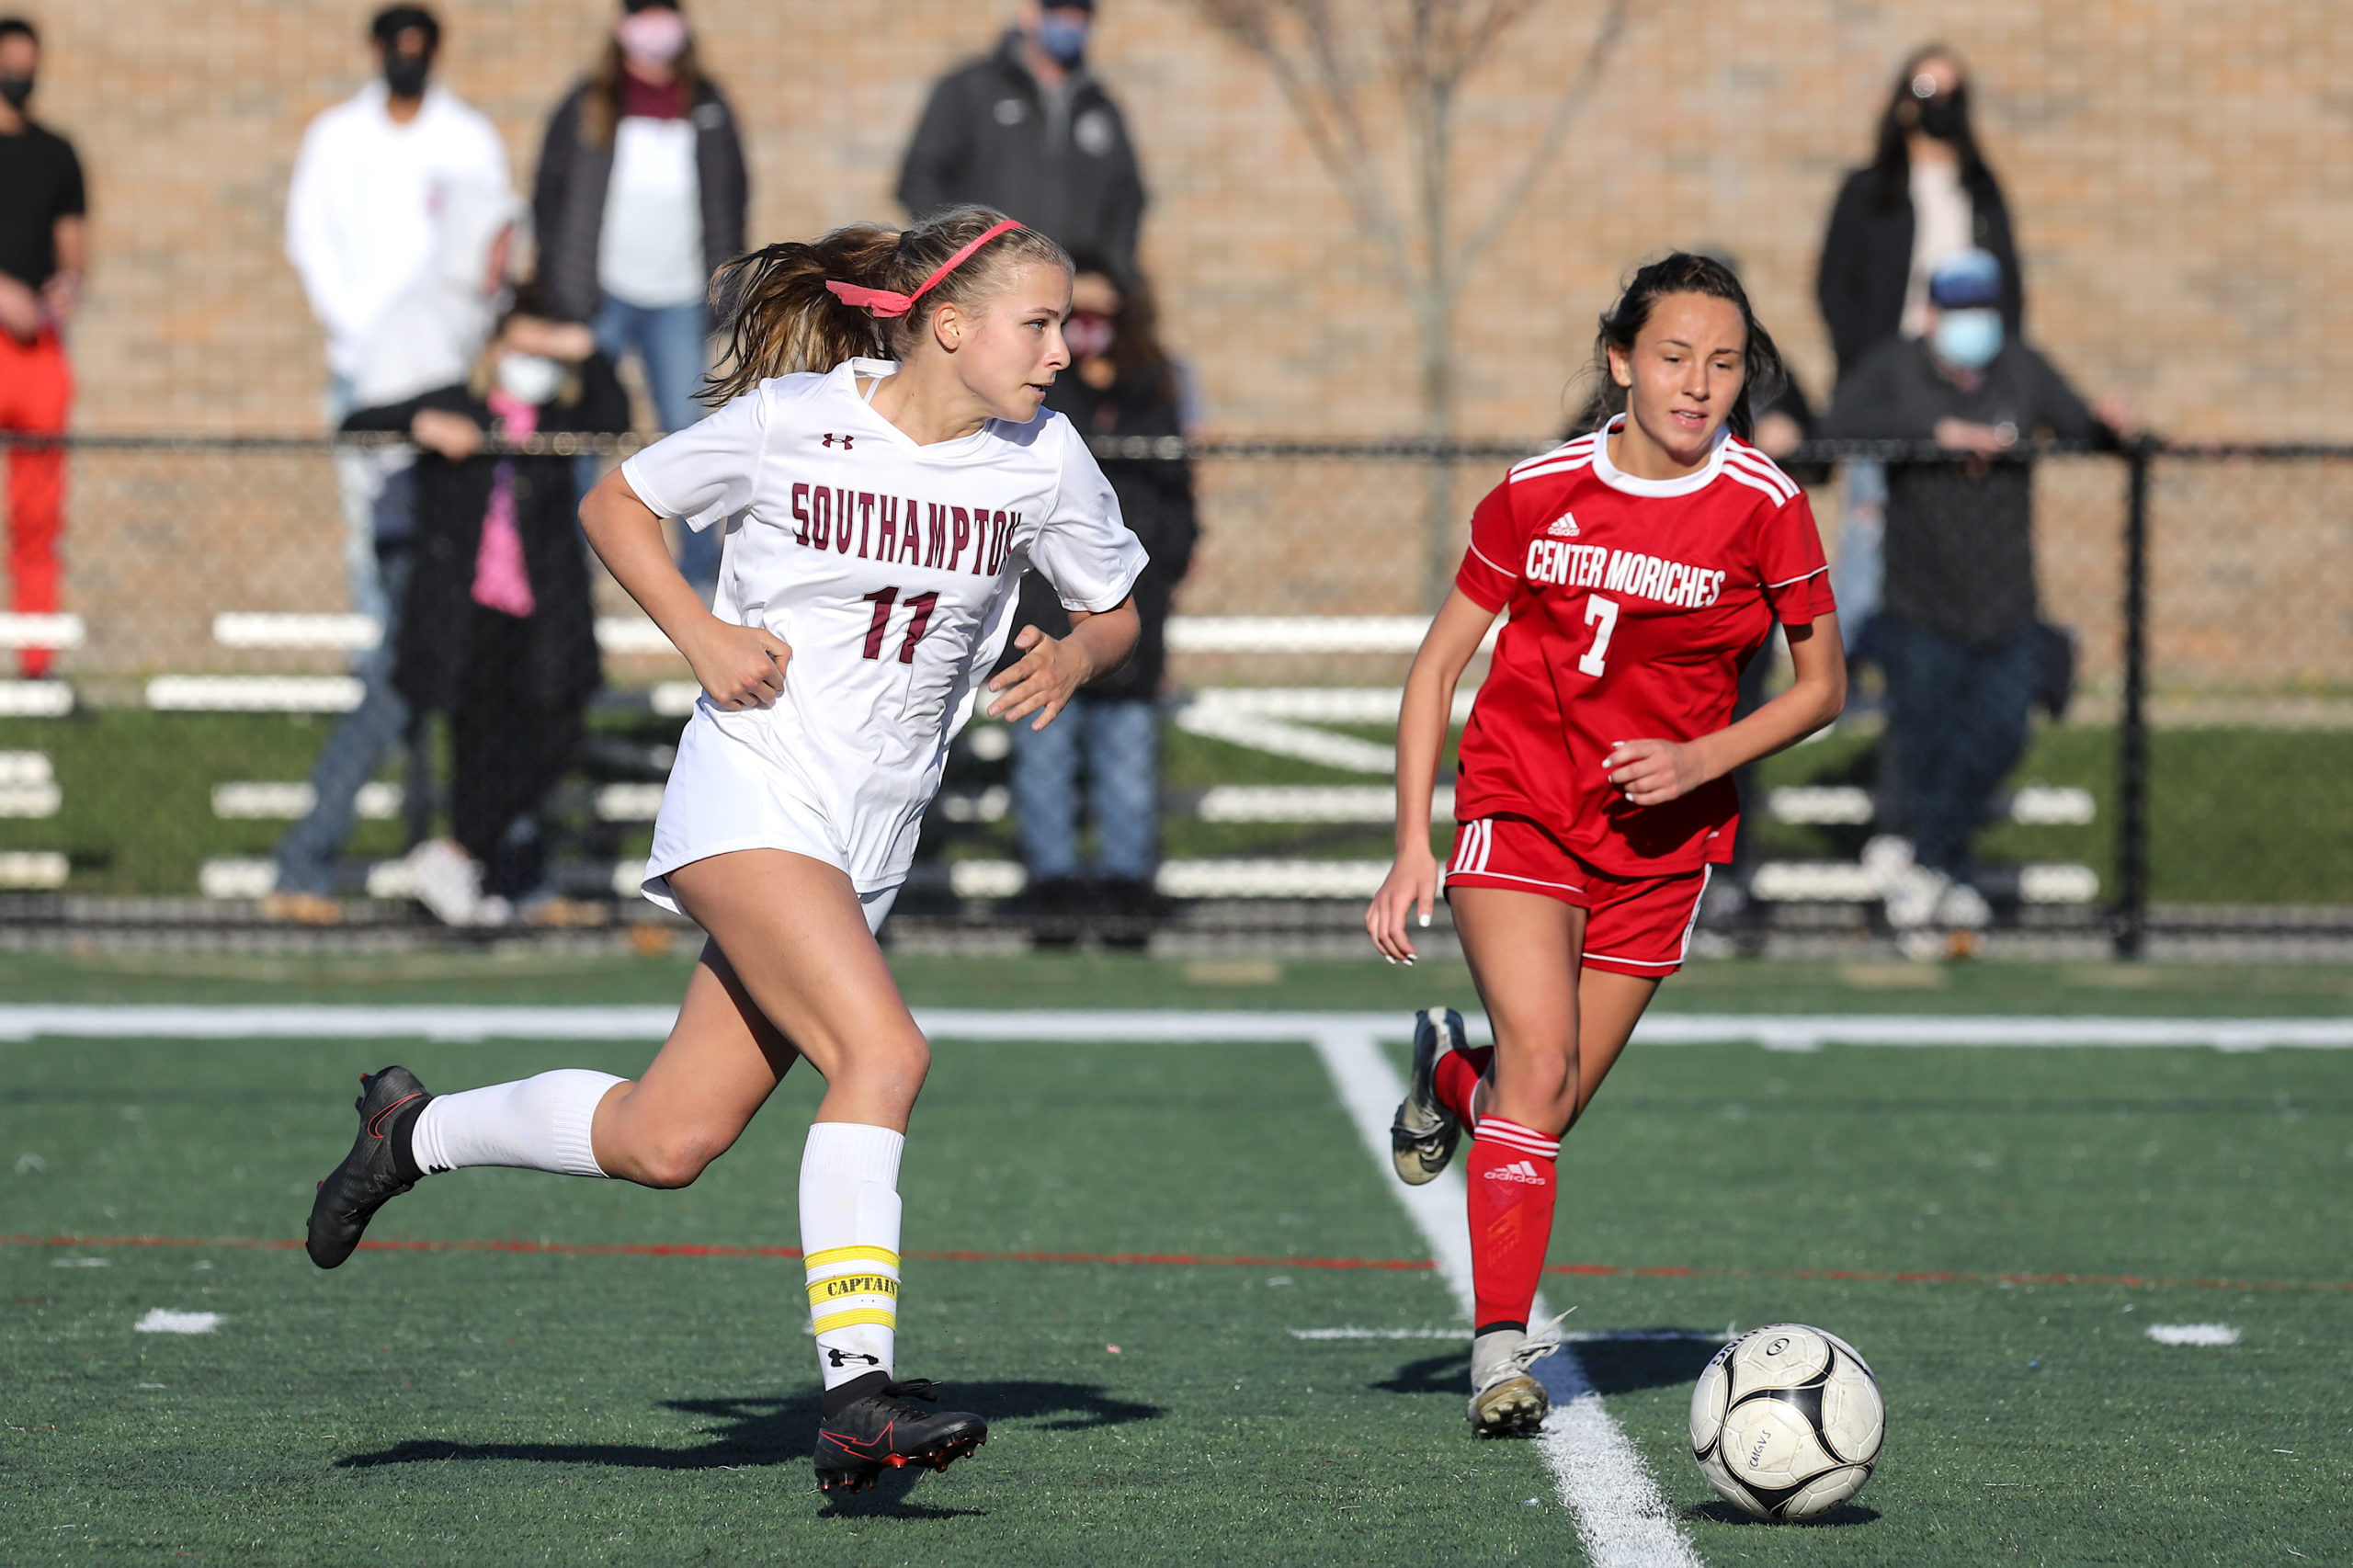 Southampton's Charlotte Cardel was one of two girls soccer players named All-County.